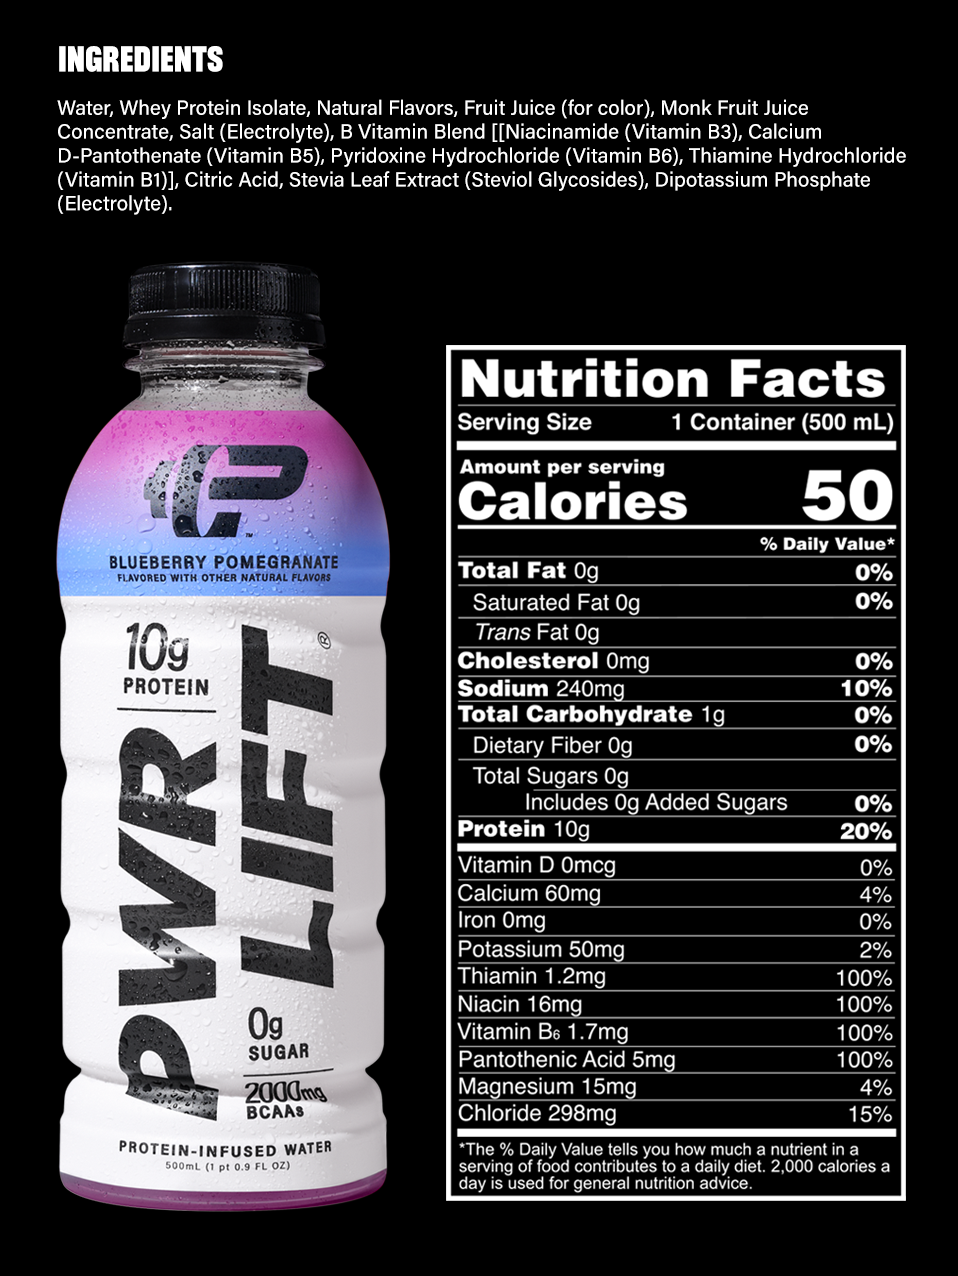 PWR LIFT Blueberry Pomegranate Ingredients and Nutritional Facts